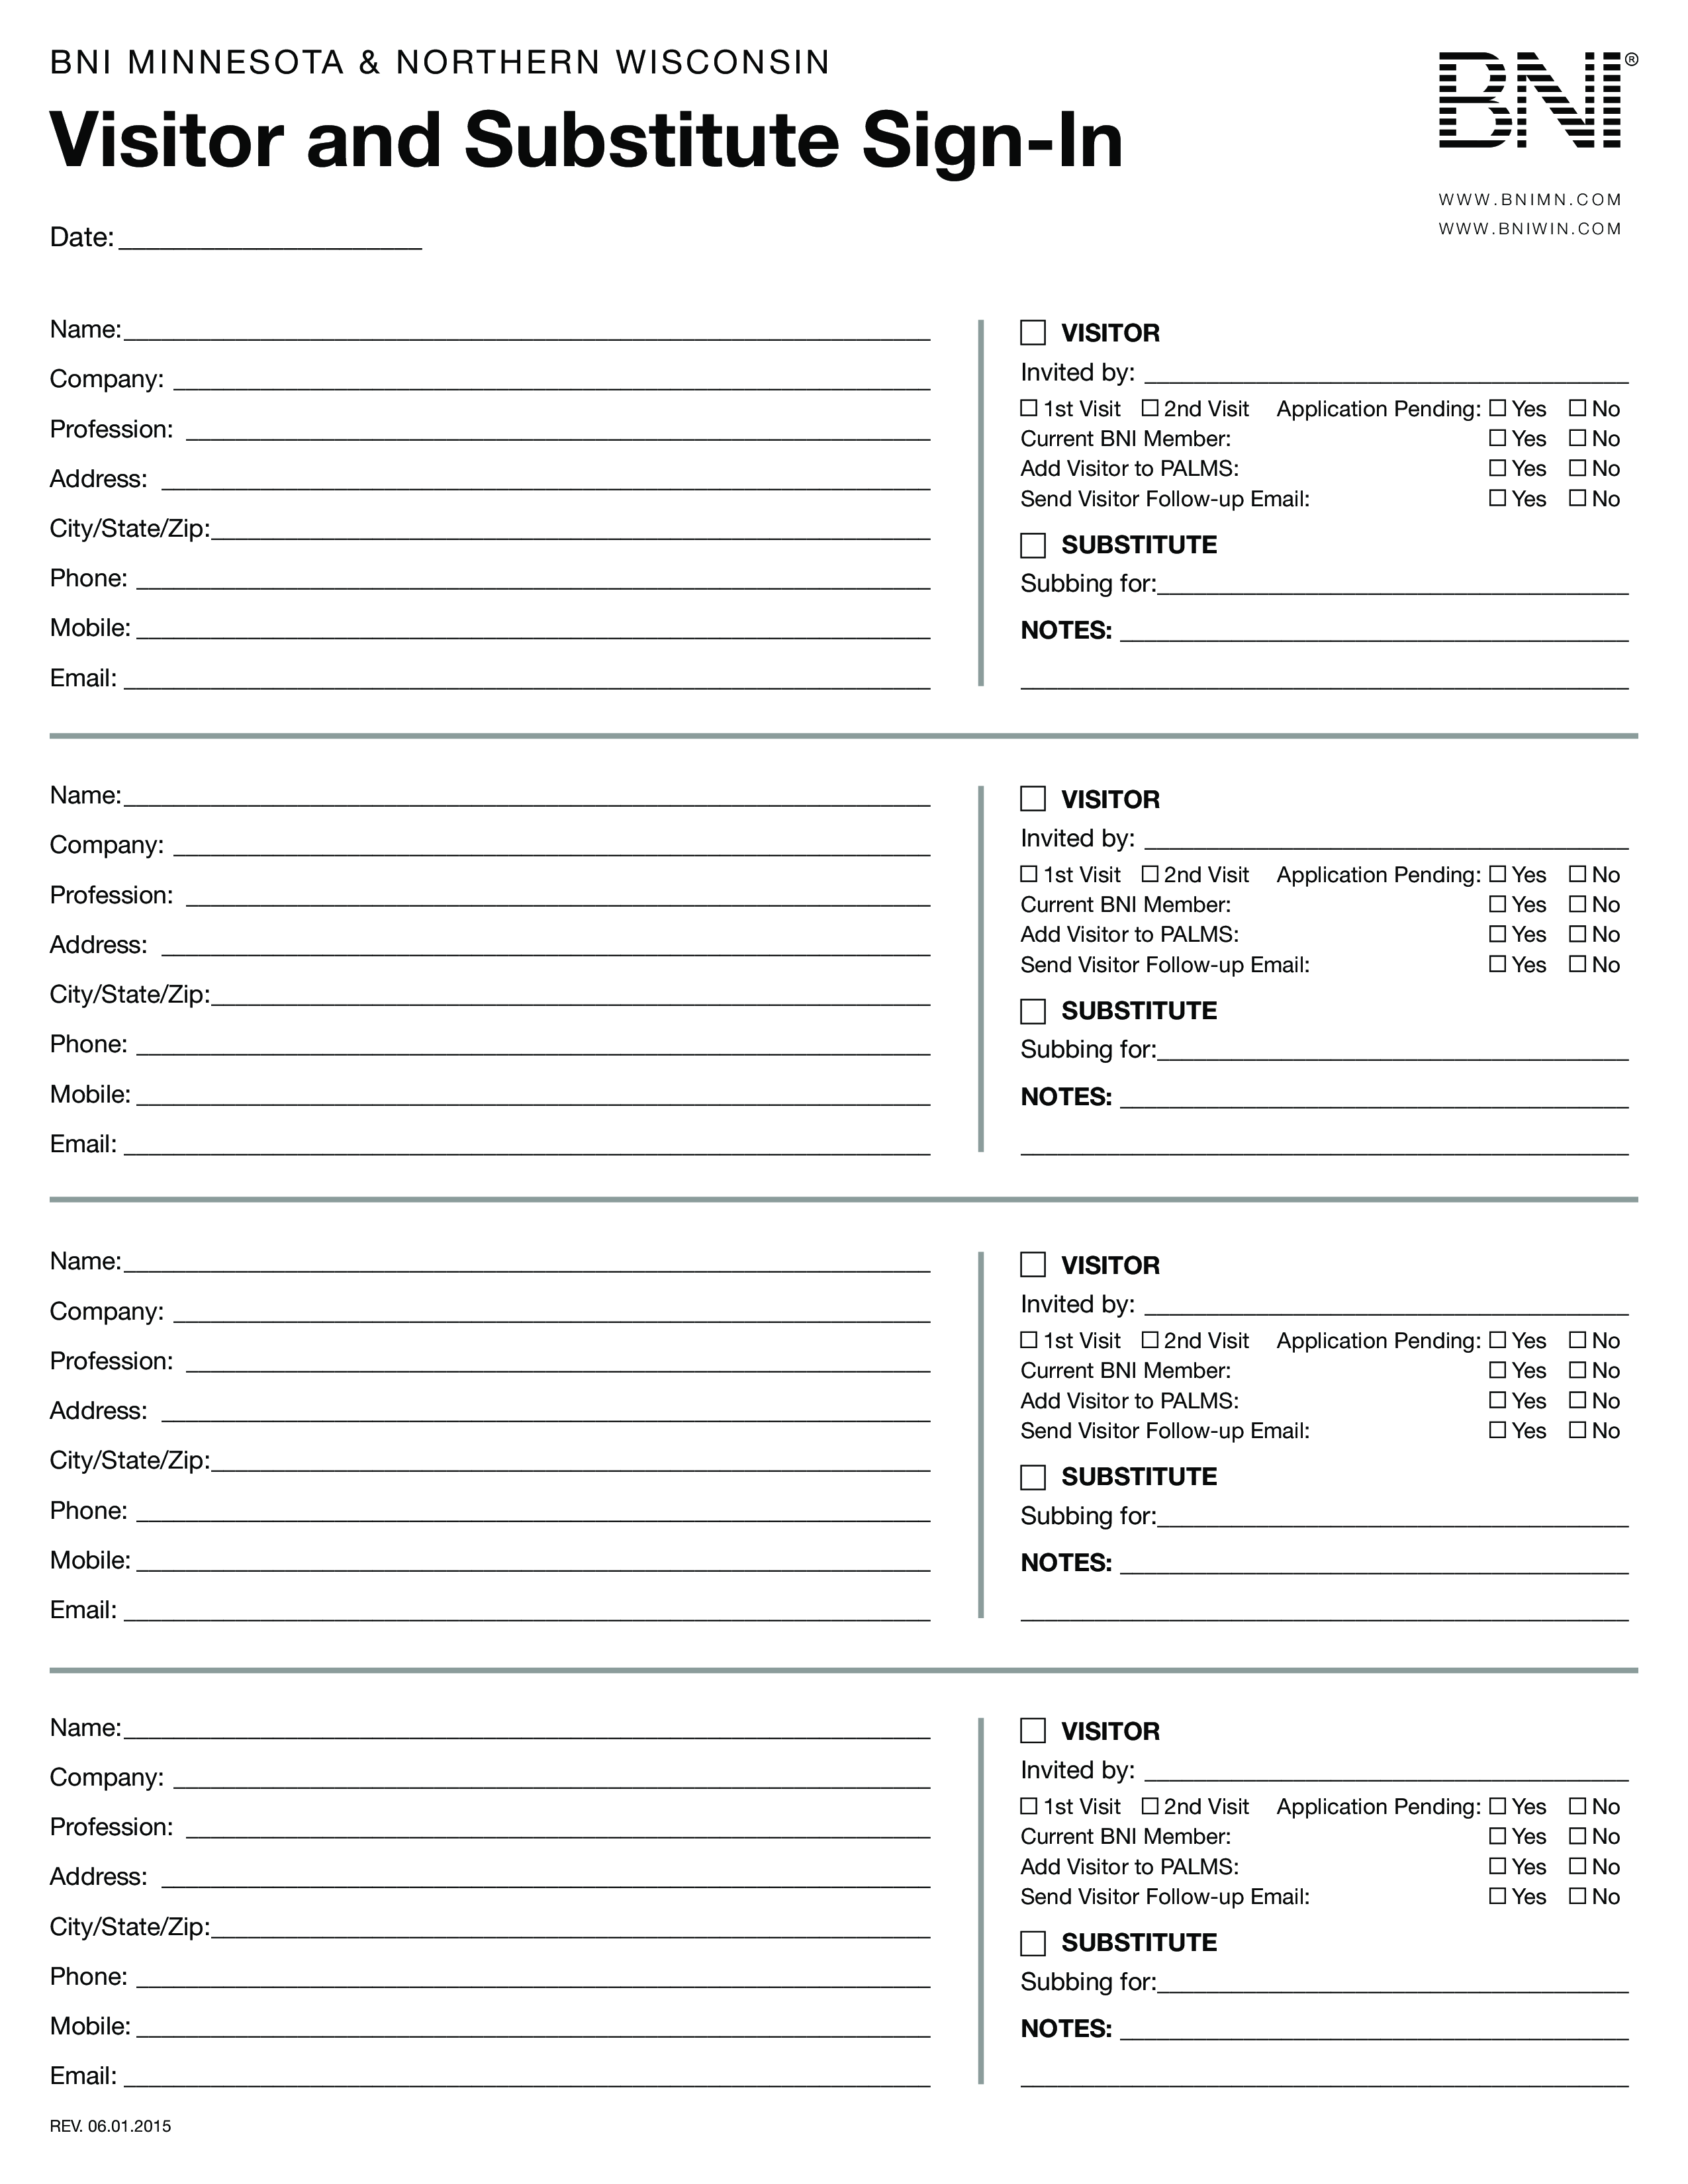 Visitor Sign In Sheet Templates at